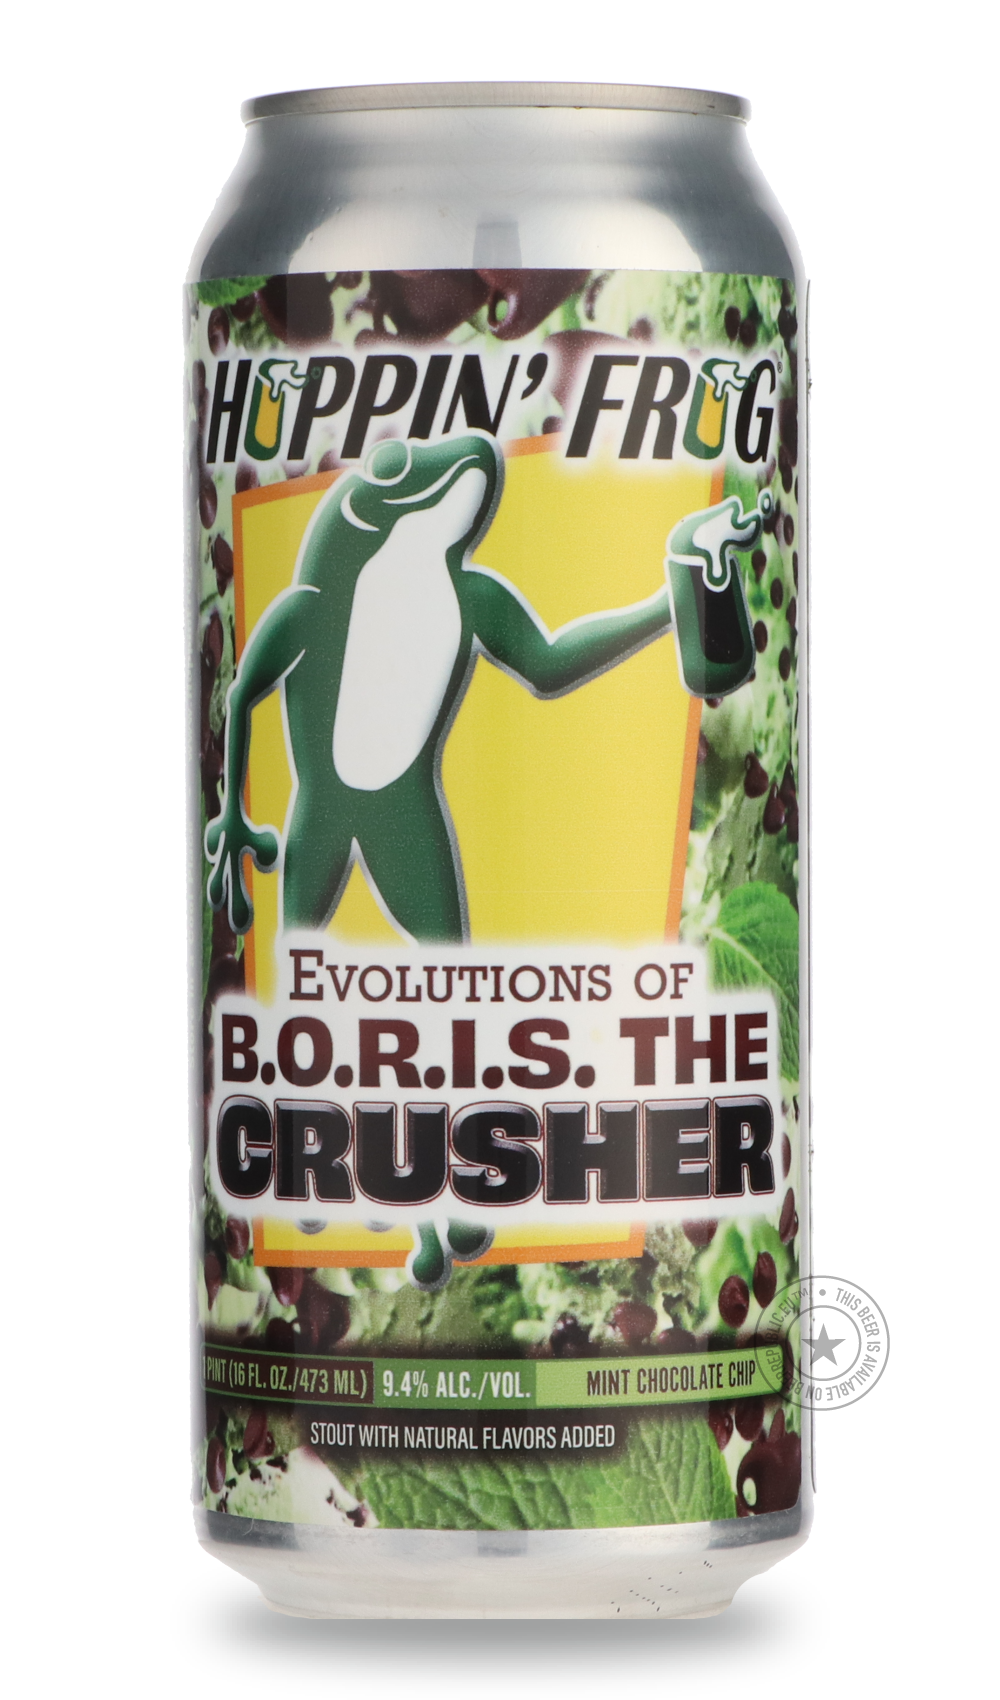 -Hoppin' Frog- Evolutions of B.O.R.I.S. the Crusher Mint Chocolate Chip-Brown & Dark- Only @ Beer Republic - The best online beer store for American & Canadian craft beer - Buy beer online from the USA and Canada - Bier online kopen - Amerikaans bier kopen - Craft beer store - Craft beer kopen - Amerikanisch bier kaufen - Bier online kaufen - Acheter biere online - IPA - Stout - Porter - New England IPA - Hazy IPA - Imperial Stout - Barrel Aged - Barrel Aged Imperial Stout - Brown - Dark beer - Blond - Blon